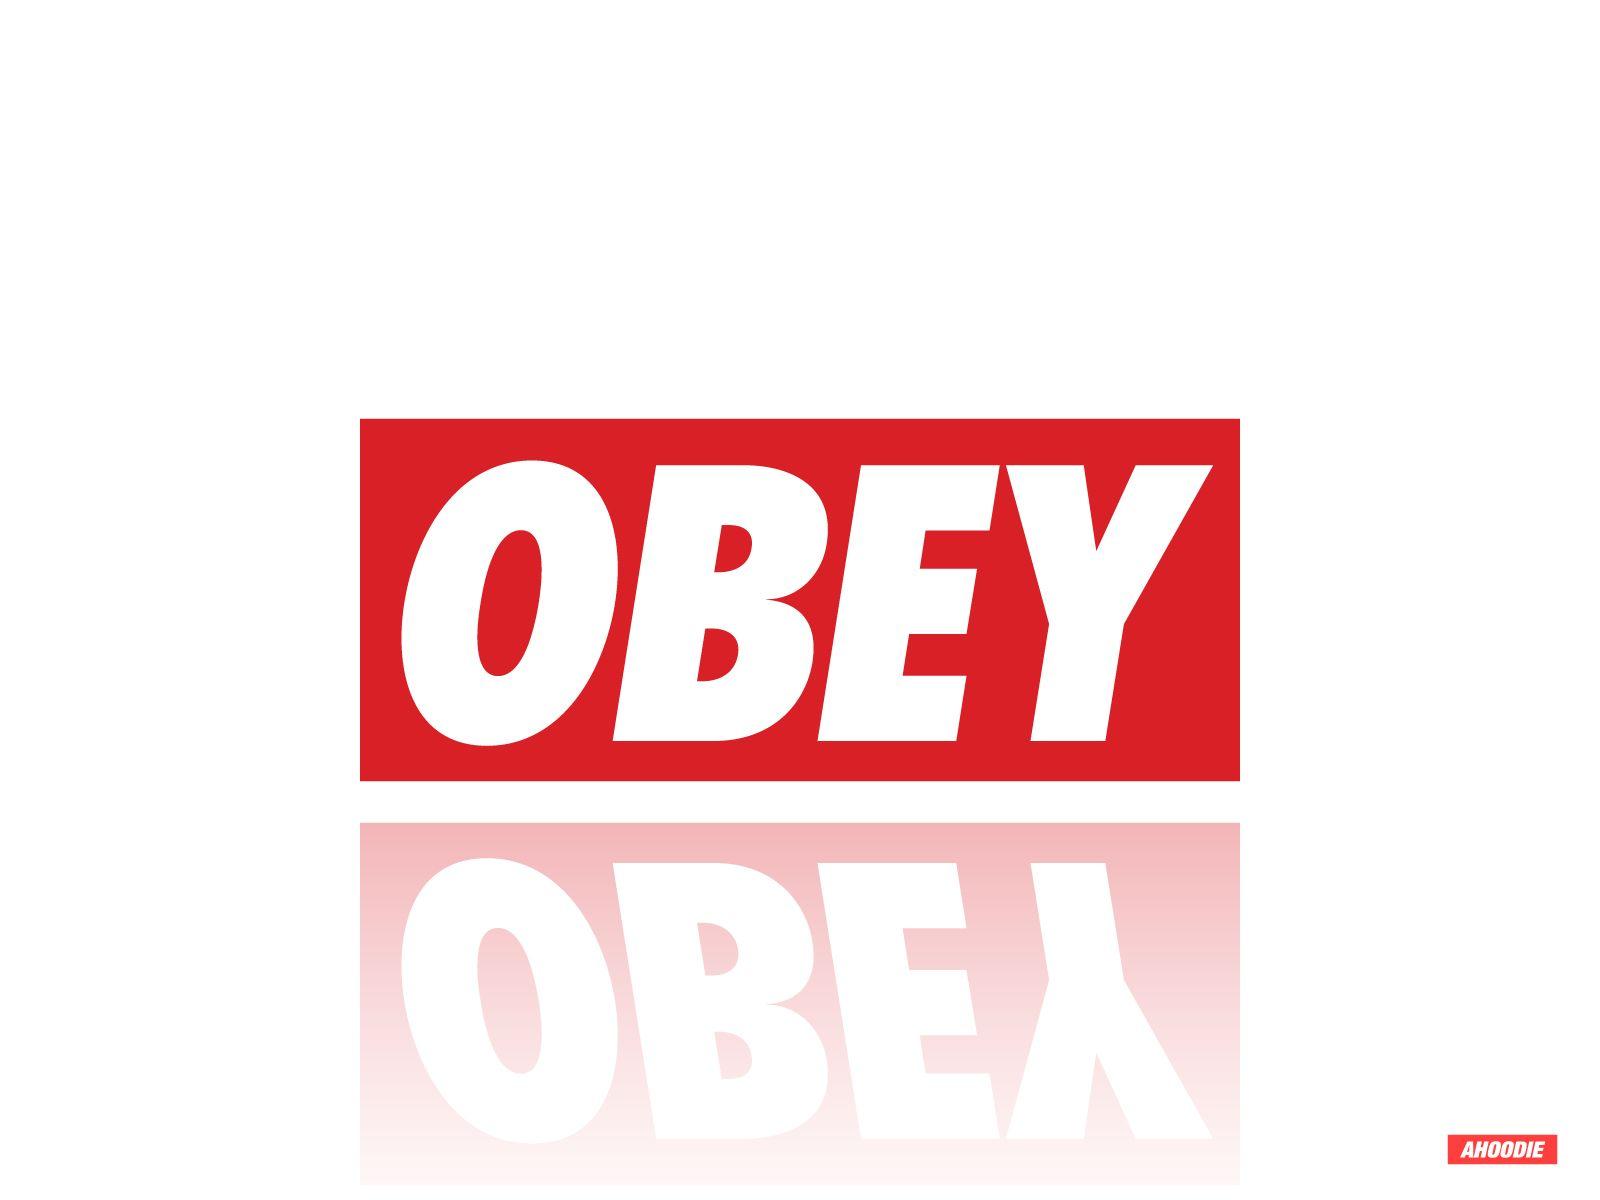 Cool Obey Logo - Obey Wallpaper - Wallpapers Browse